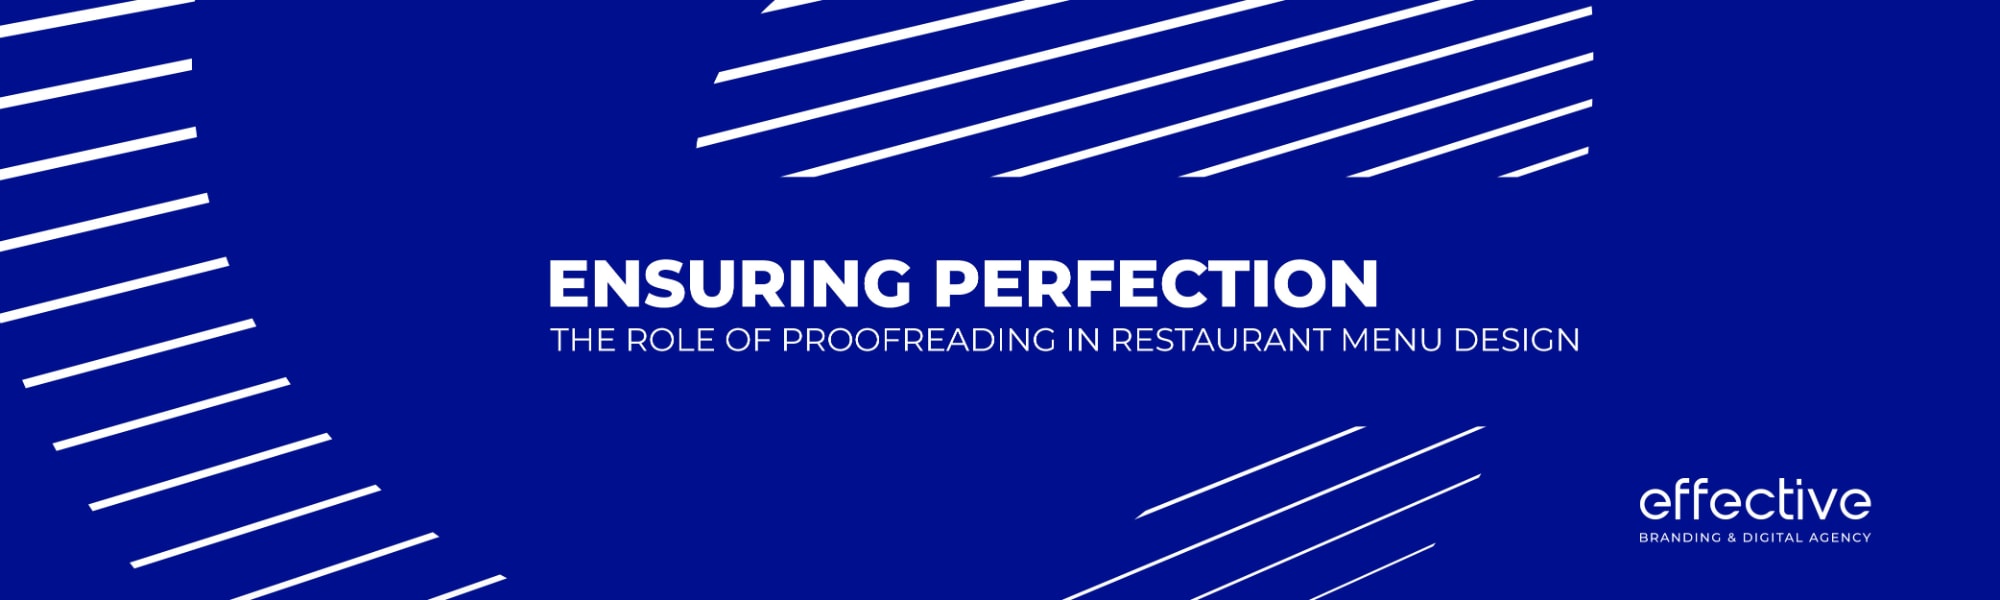 Ensuring Perfection The Role of Proofreading in Restaurant Menu Design